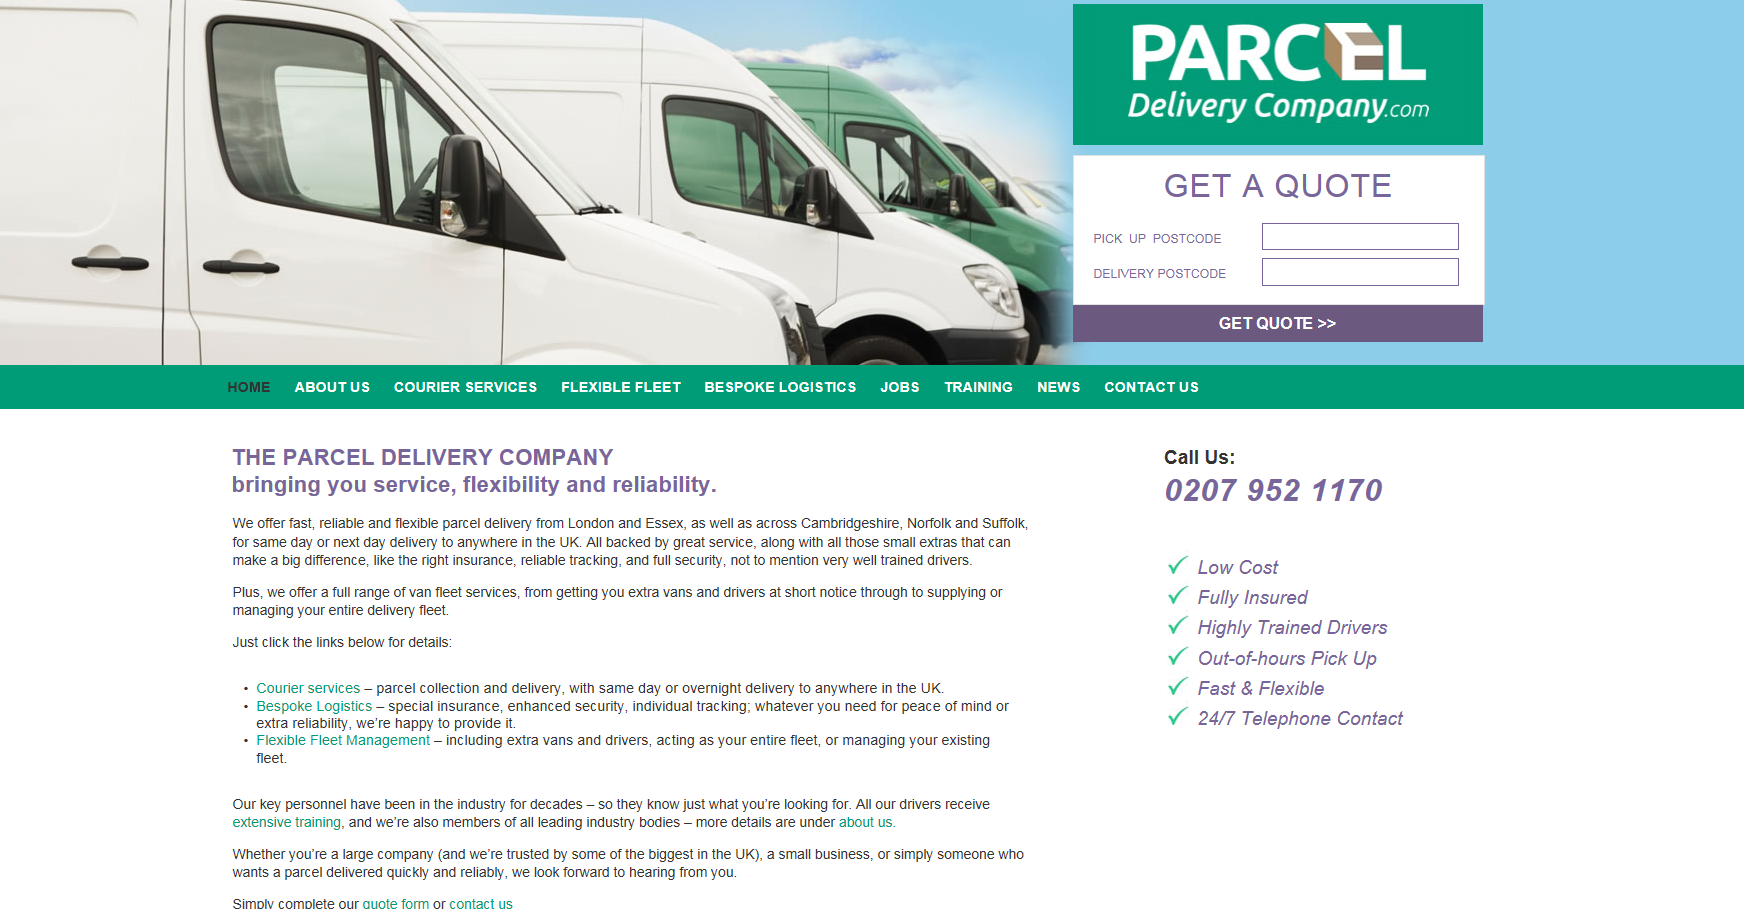 Parcel Delivery Company website homepage